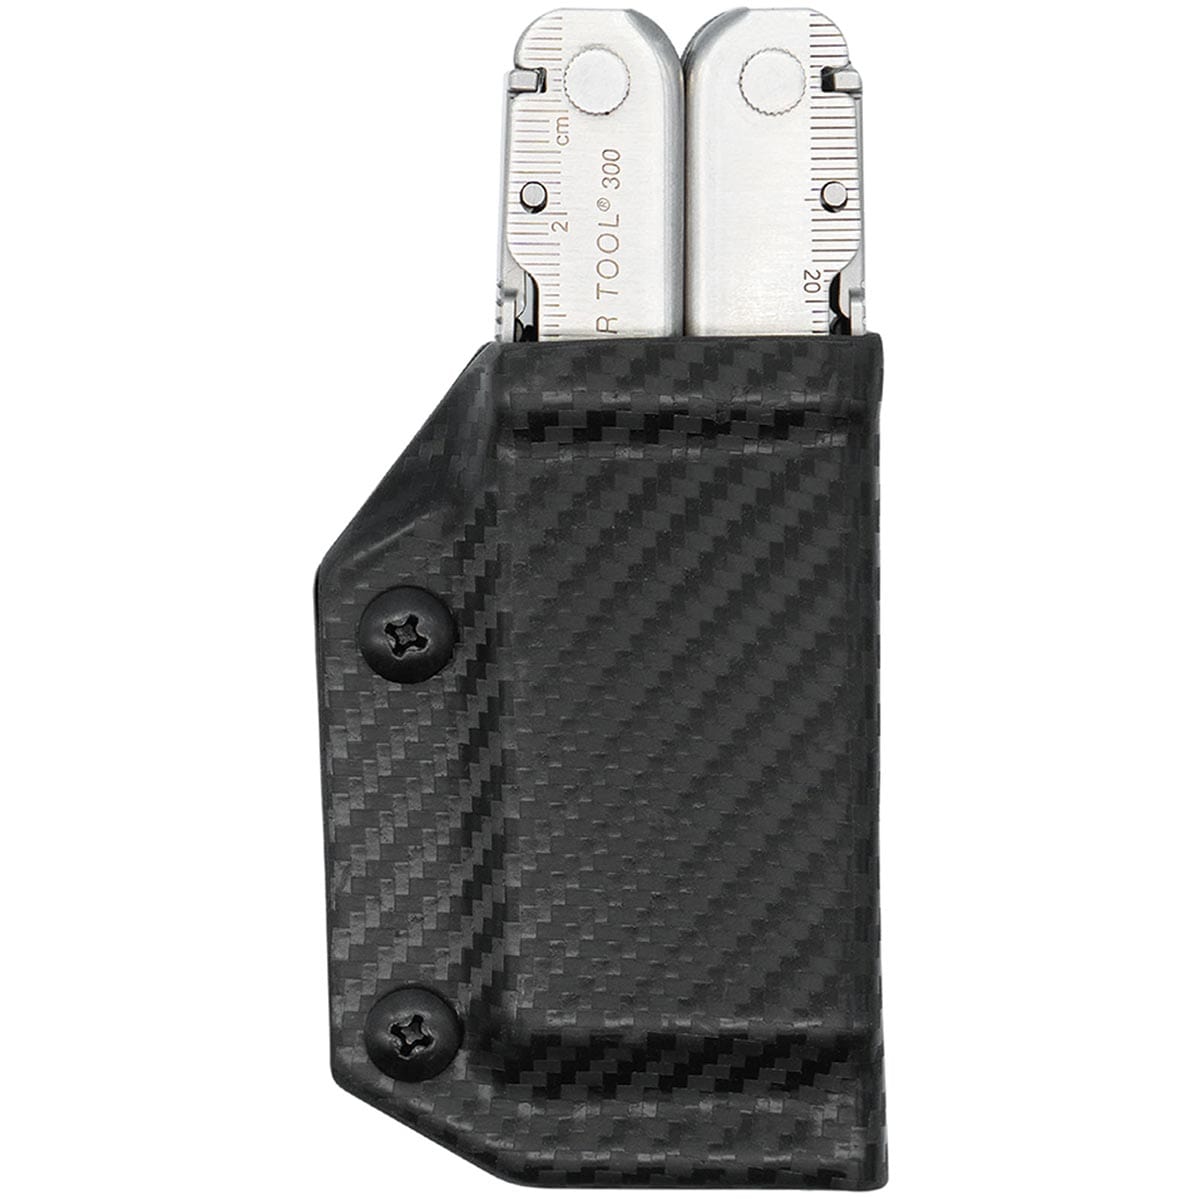 Clip & Carry Kydex Sheaths for the Leatherman Multitools